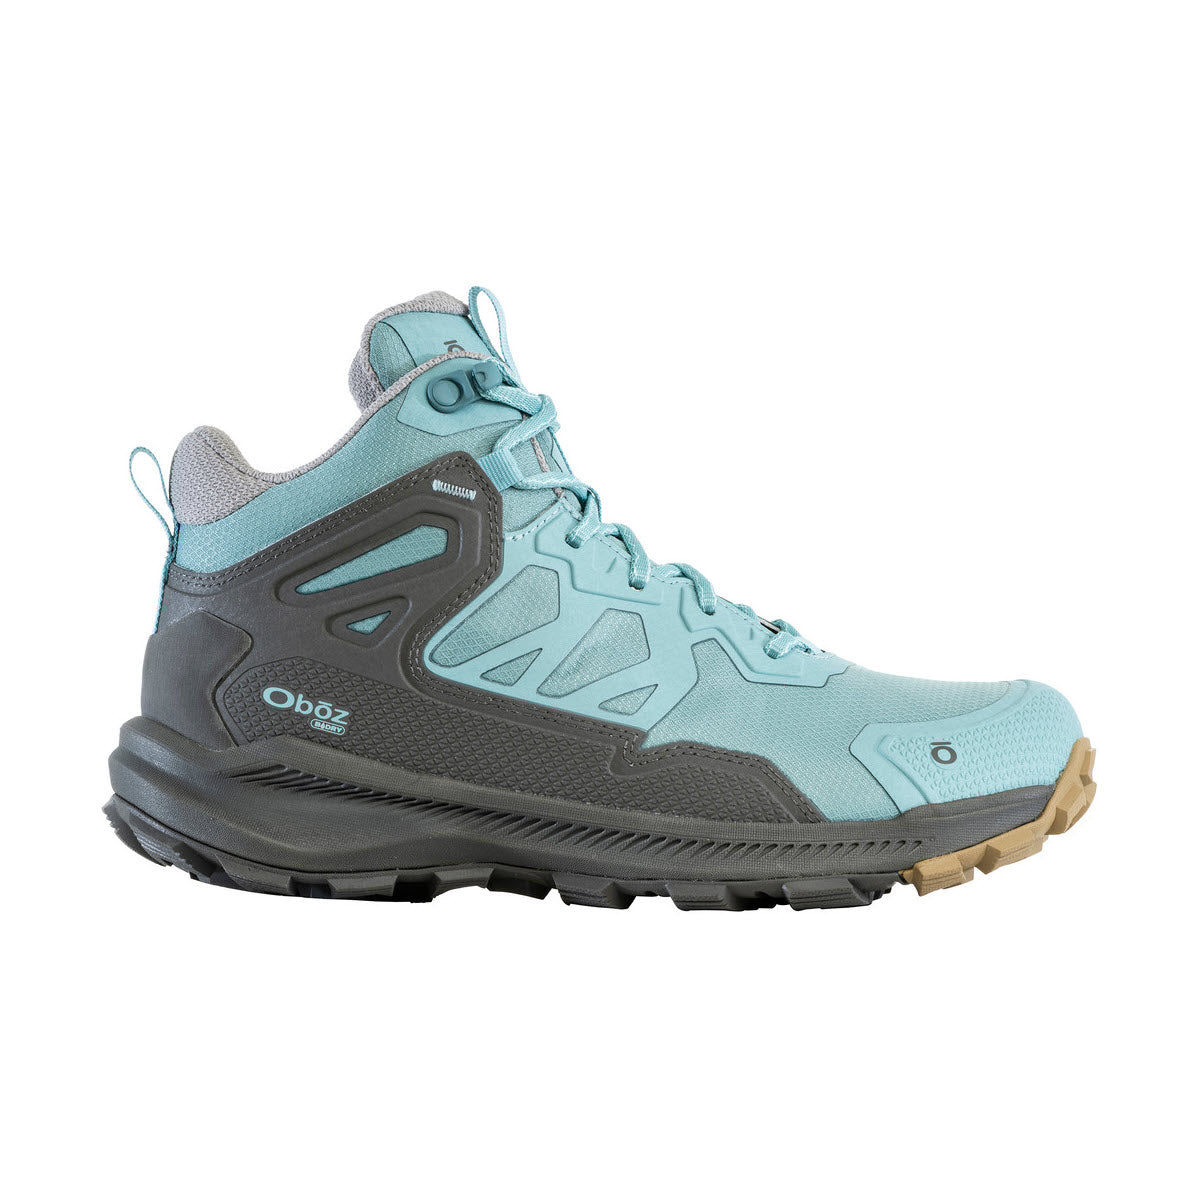 A single Oboz Katabatic Mid B-Dry Island hiking shoe in shades of blue and gray, featuring a thick rubber sole and lace-up front, isolated on a white background.